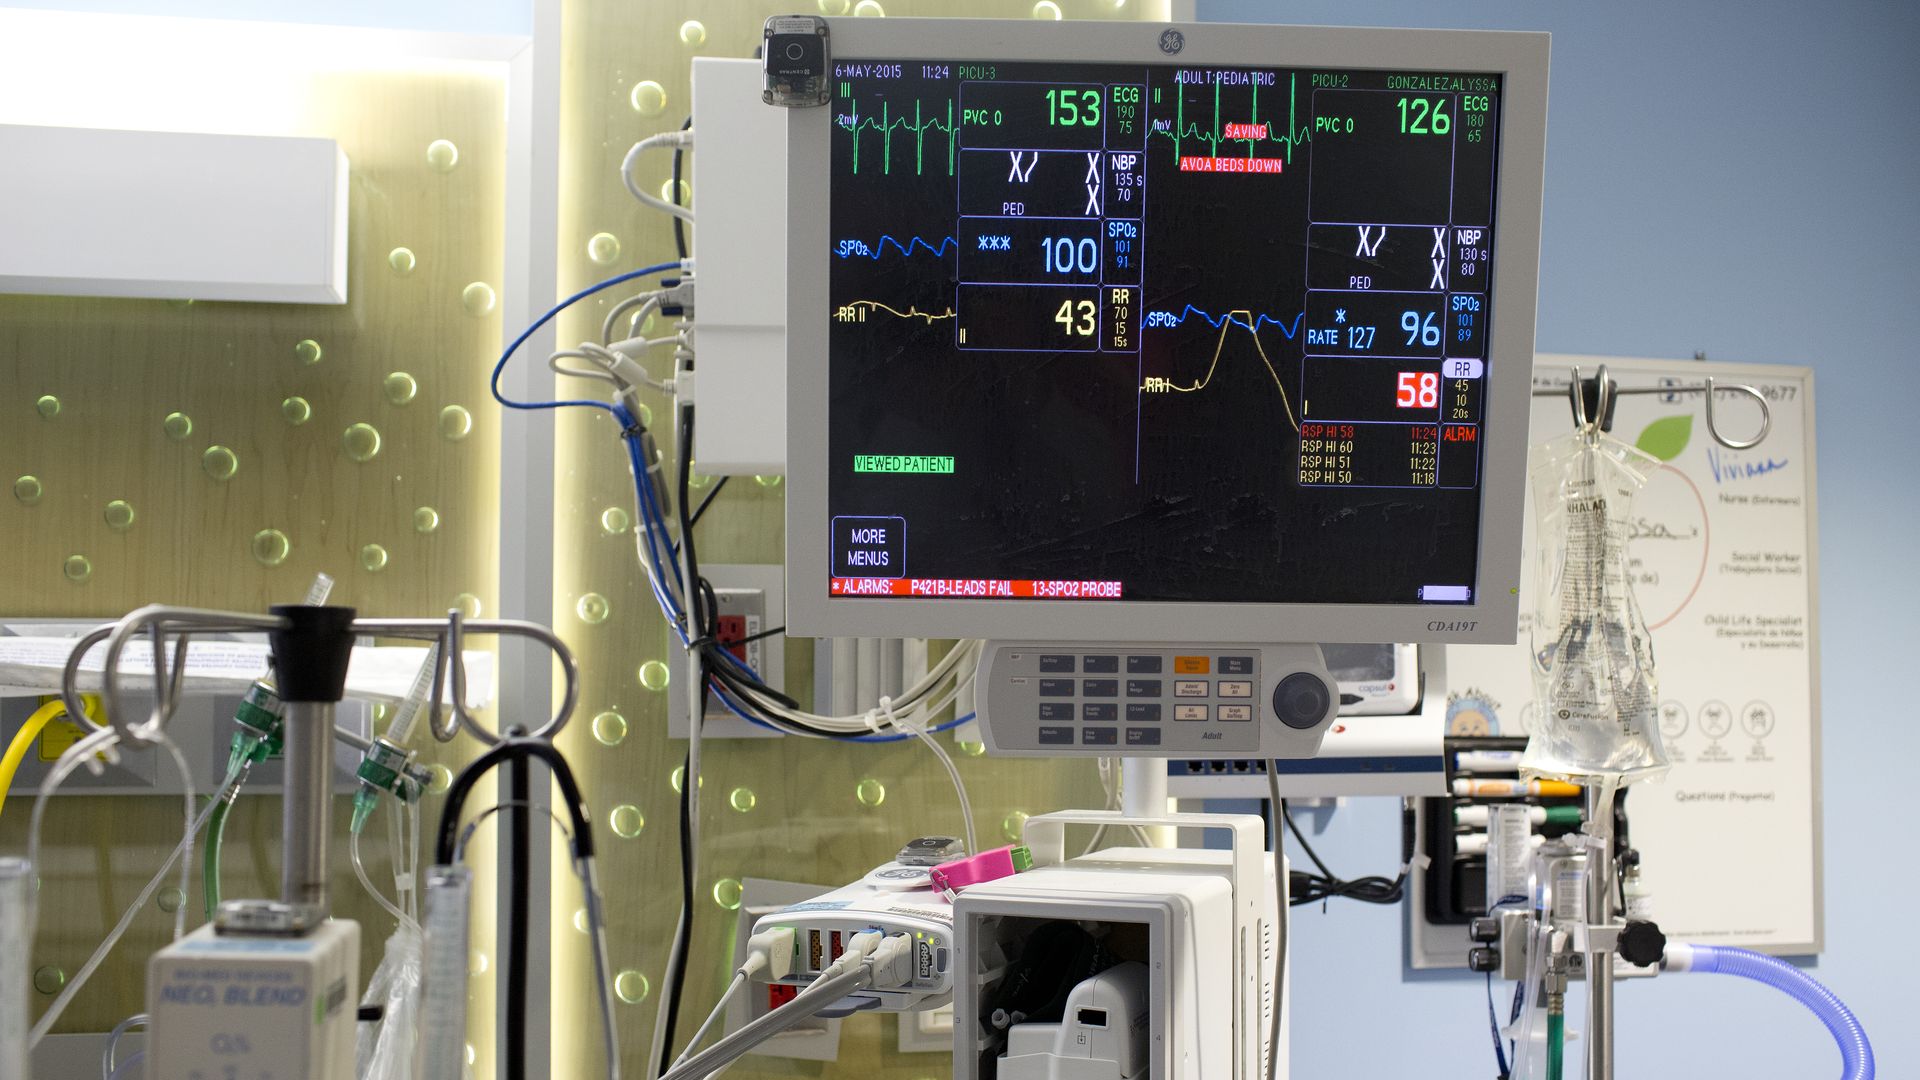 A computer monitor in a hospital room showing vitals signs.